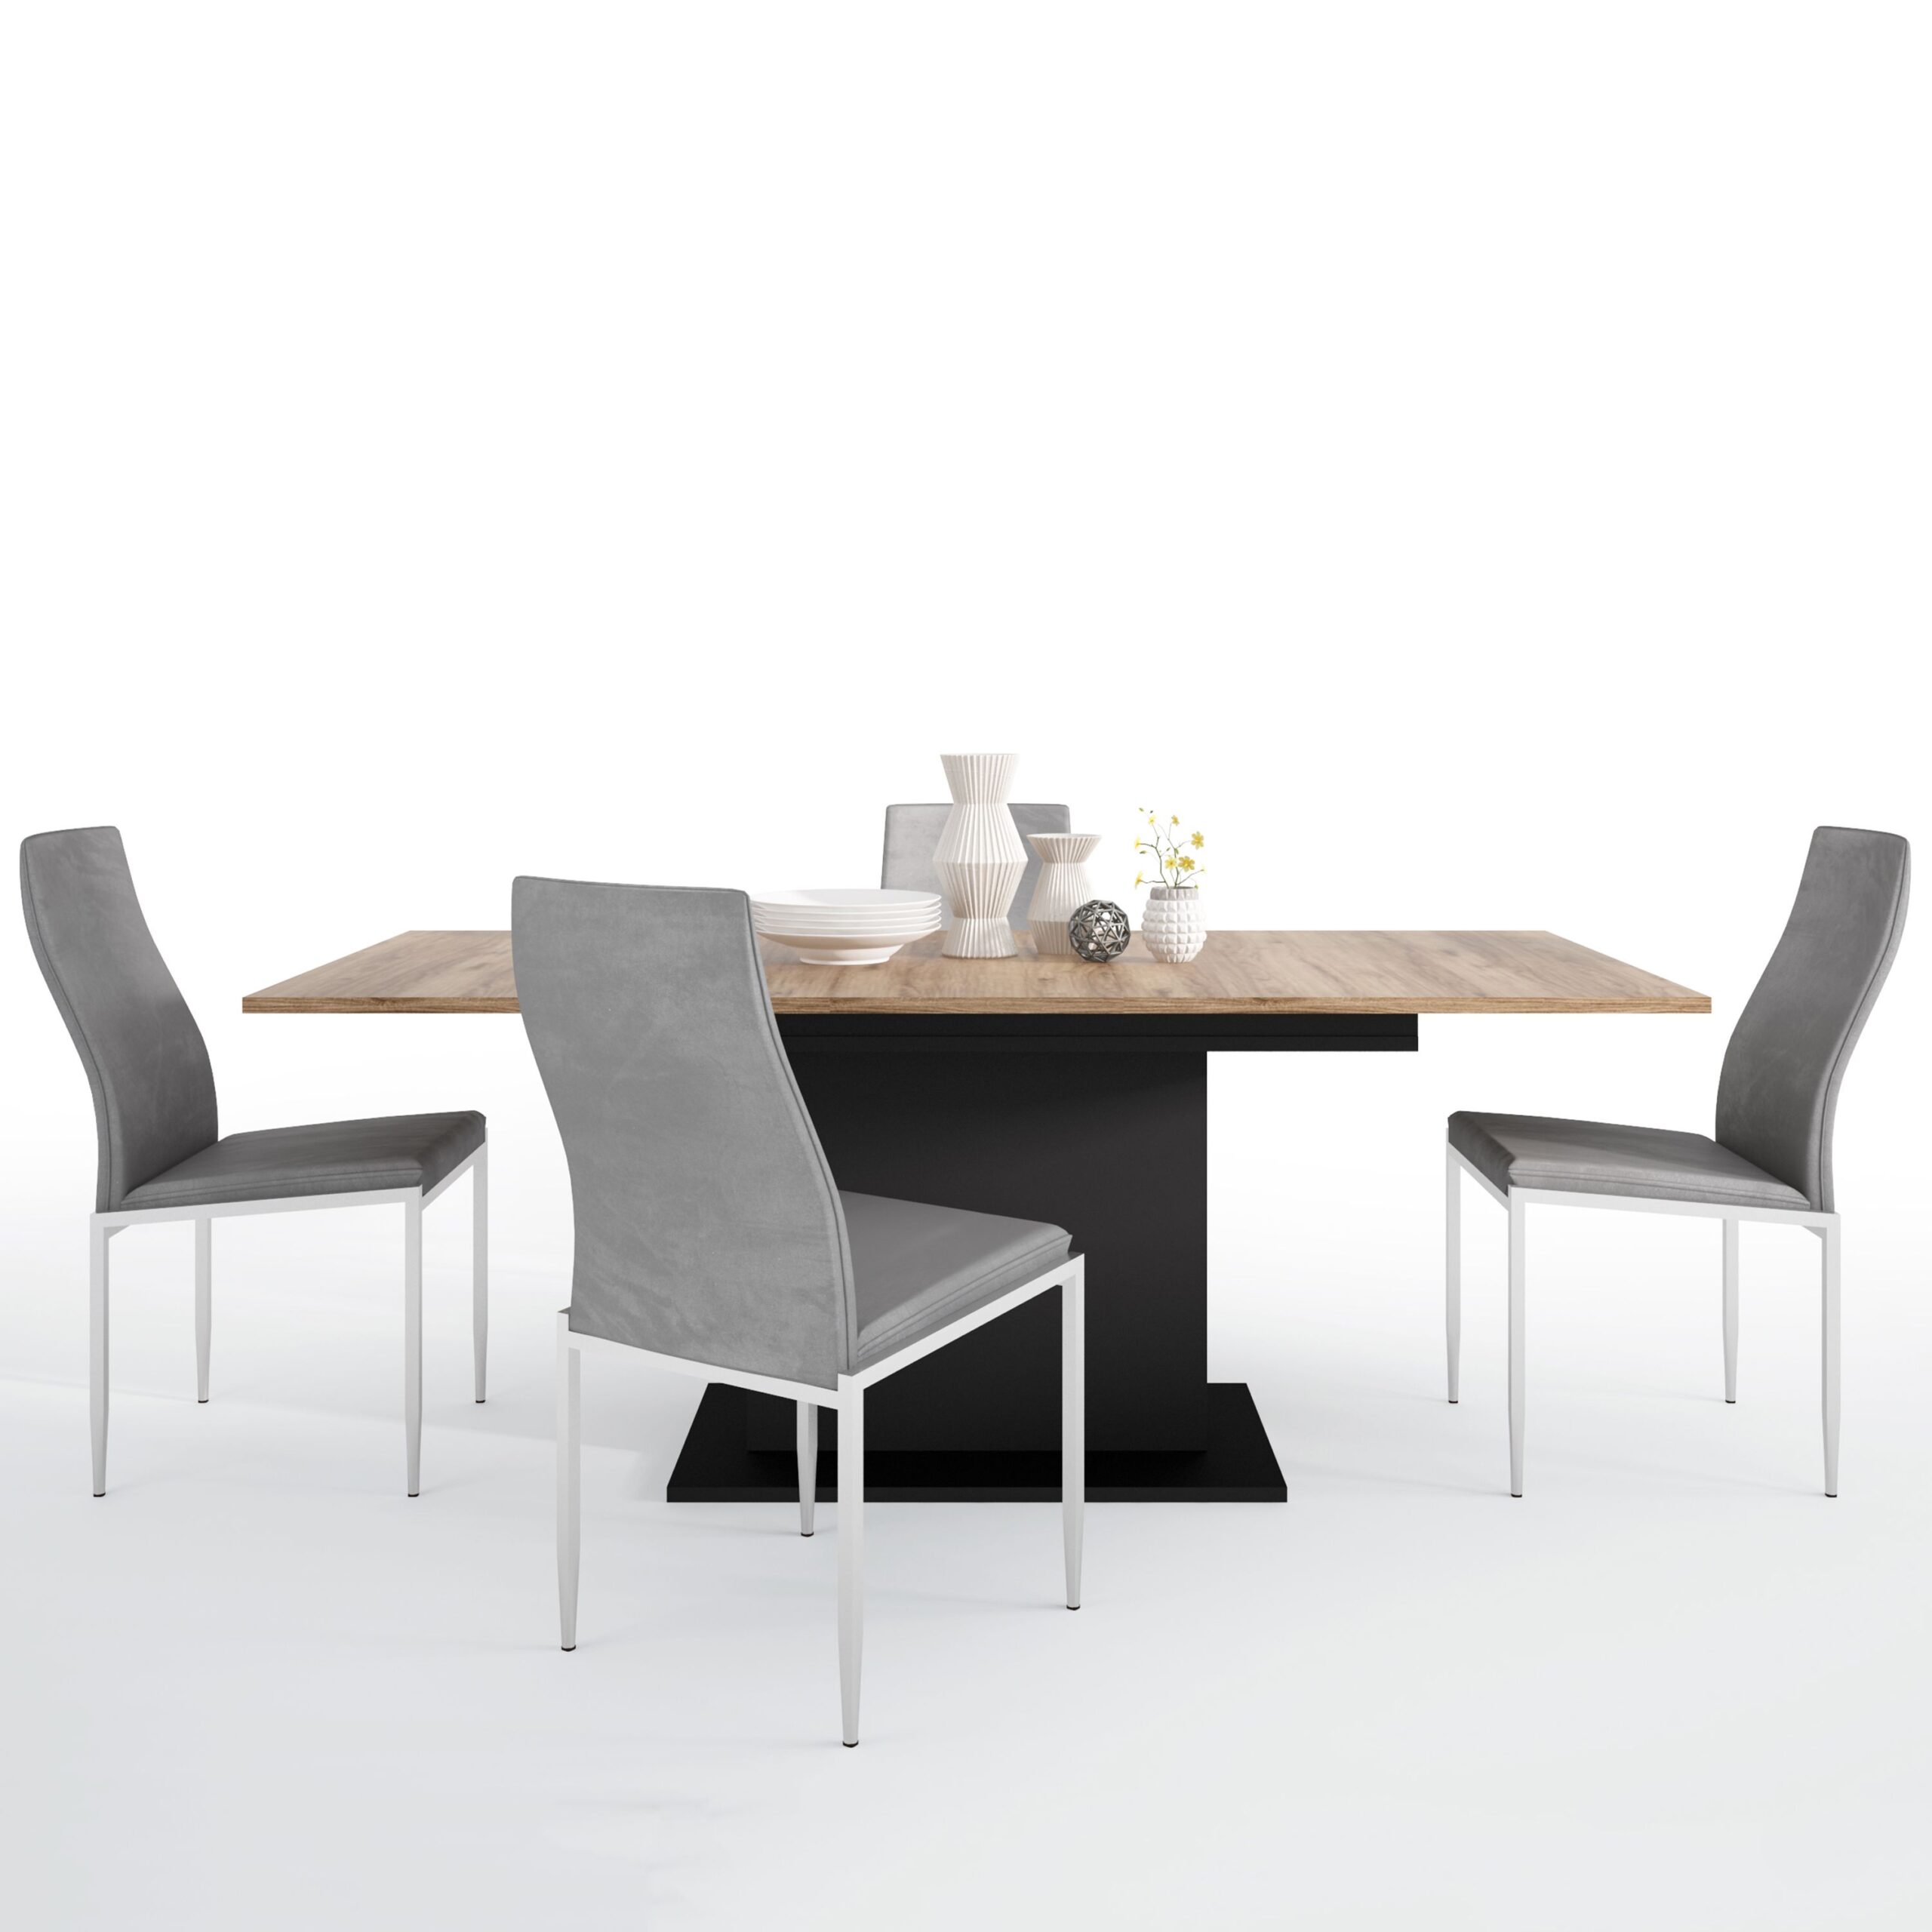 Yolo Dining set package Yolo Extending Dining Table + 4 Lillie High Back Chair Grey.